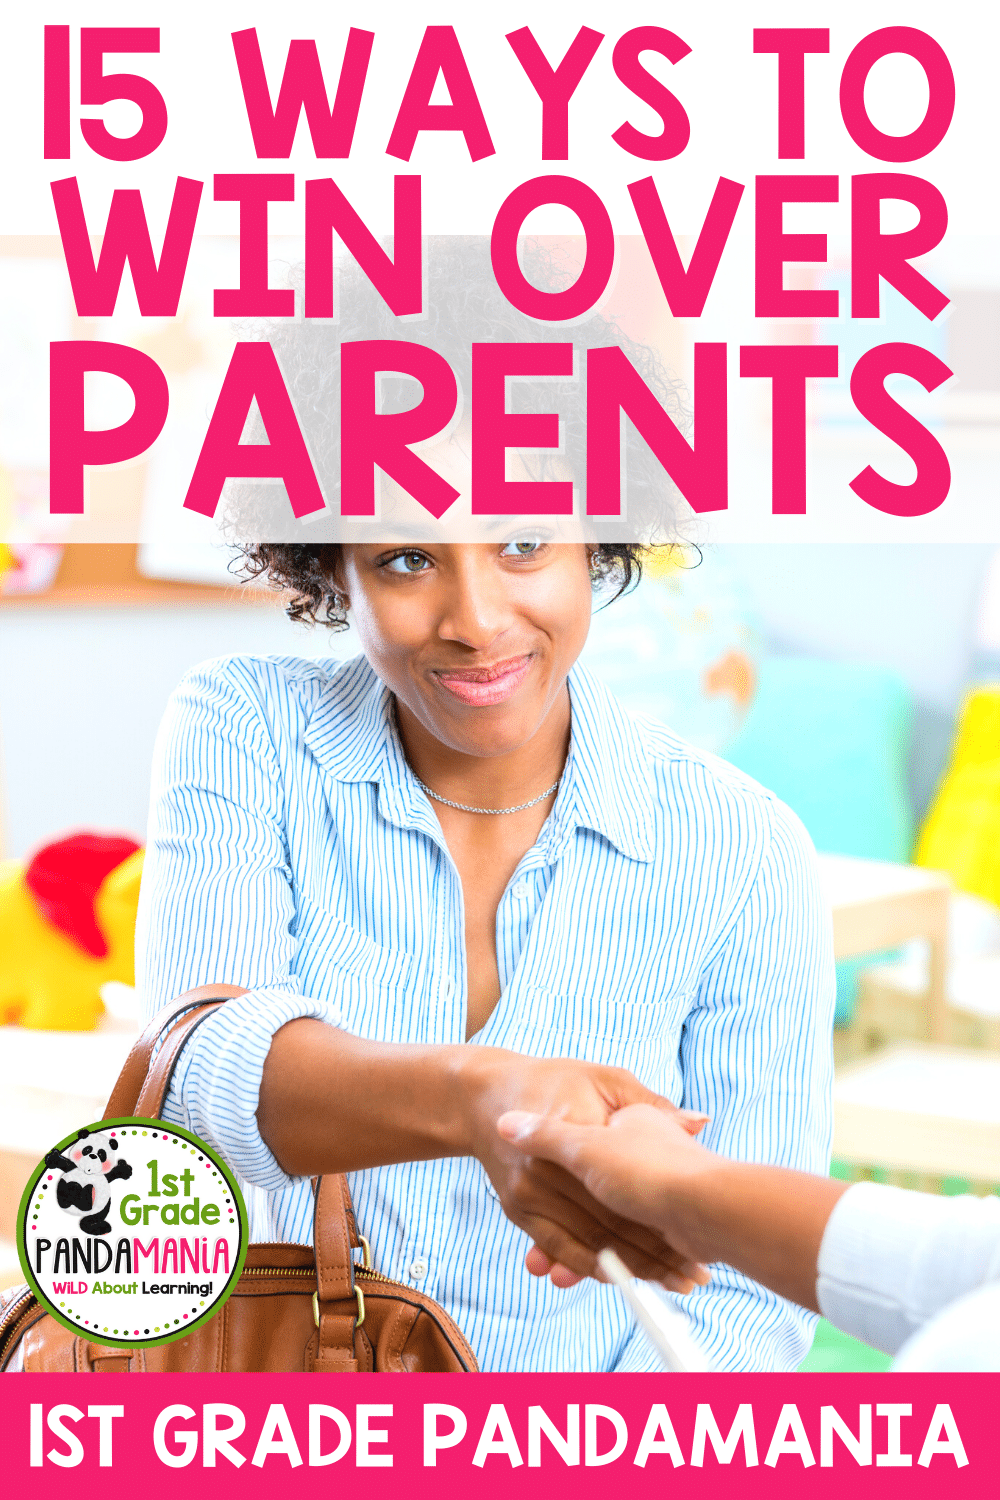 15 Great Ways to Genuinely Win Over Parents This Year! 2